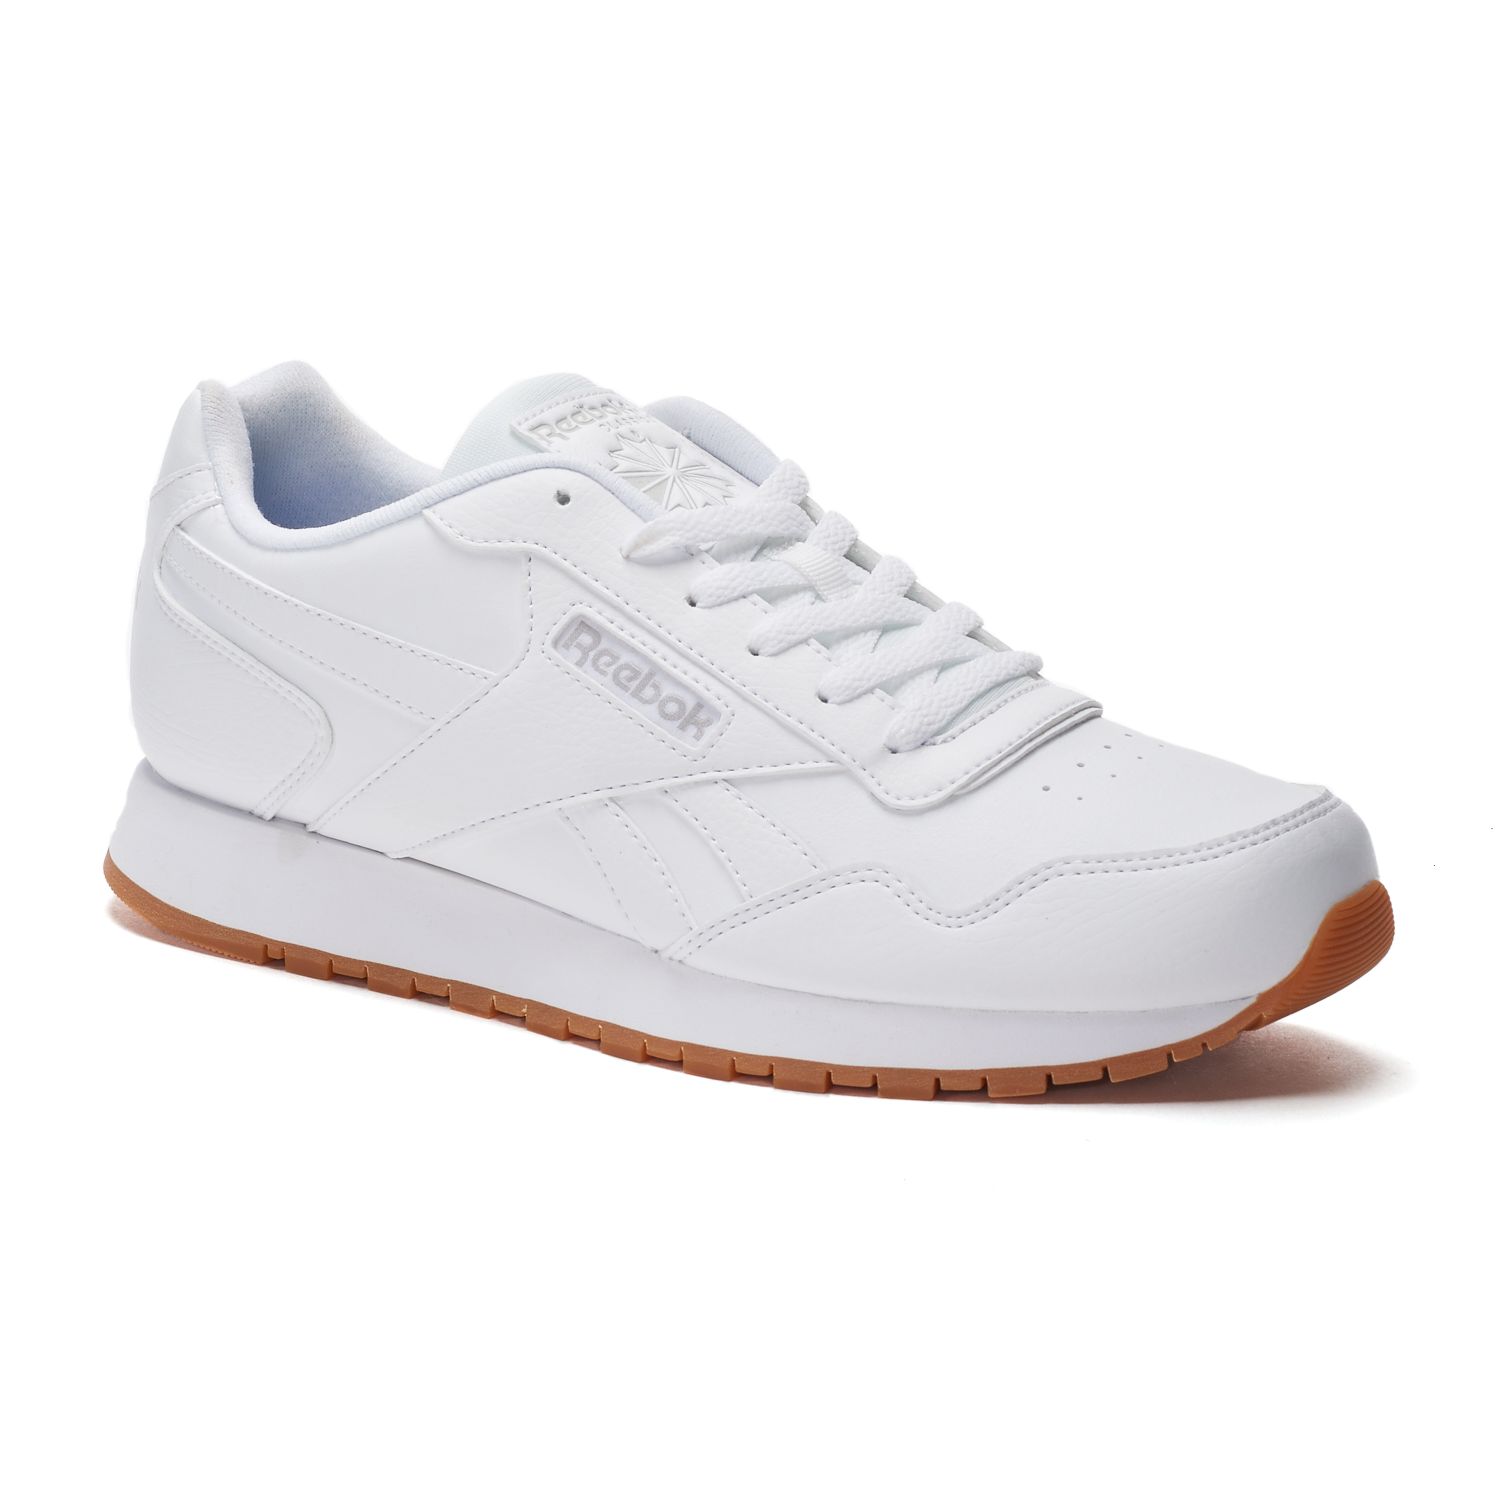 reebok shoes at lowest price